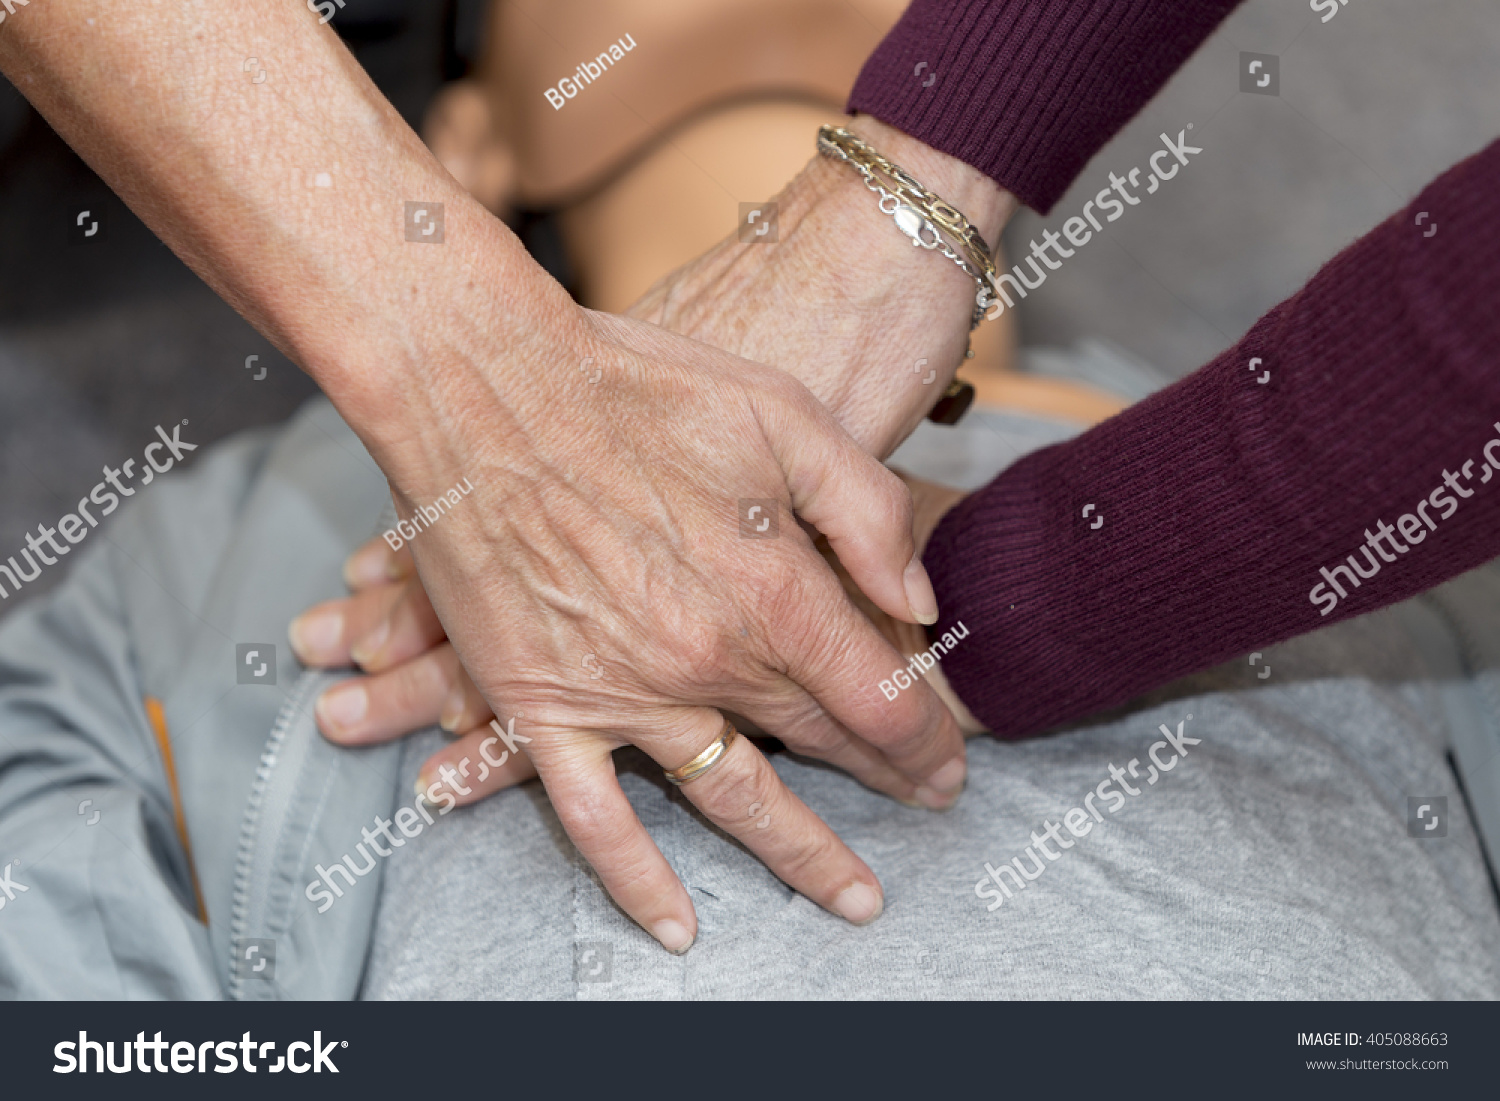 Hands of women are seen on a mannequin during an exercise of resuscitation #405088663